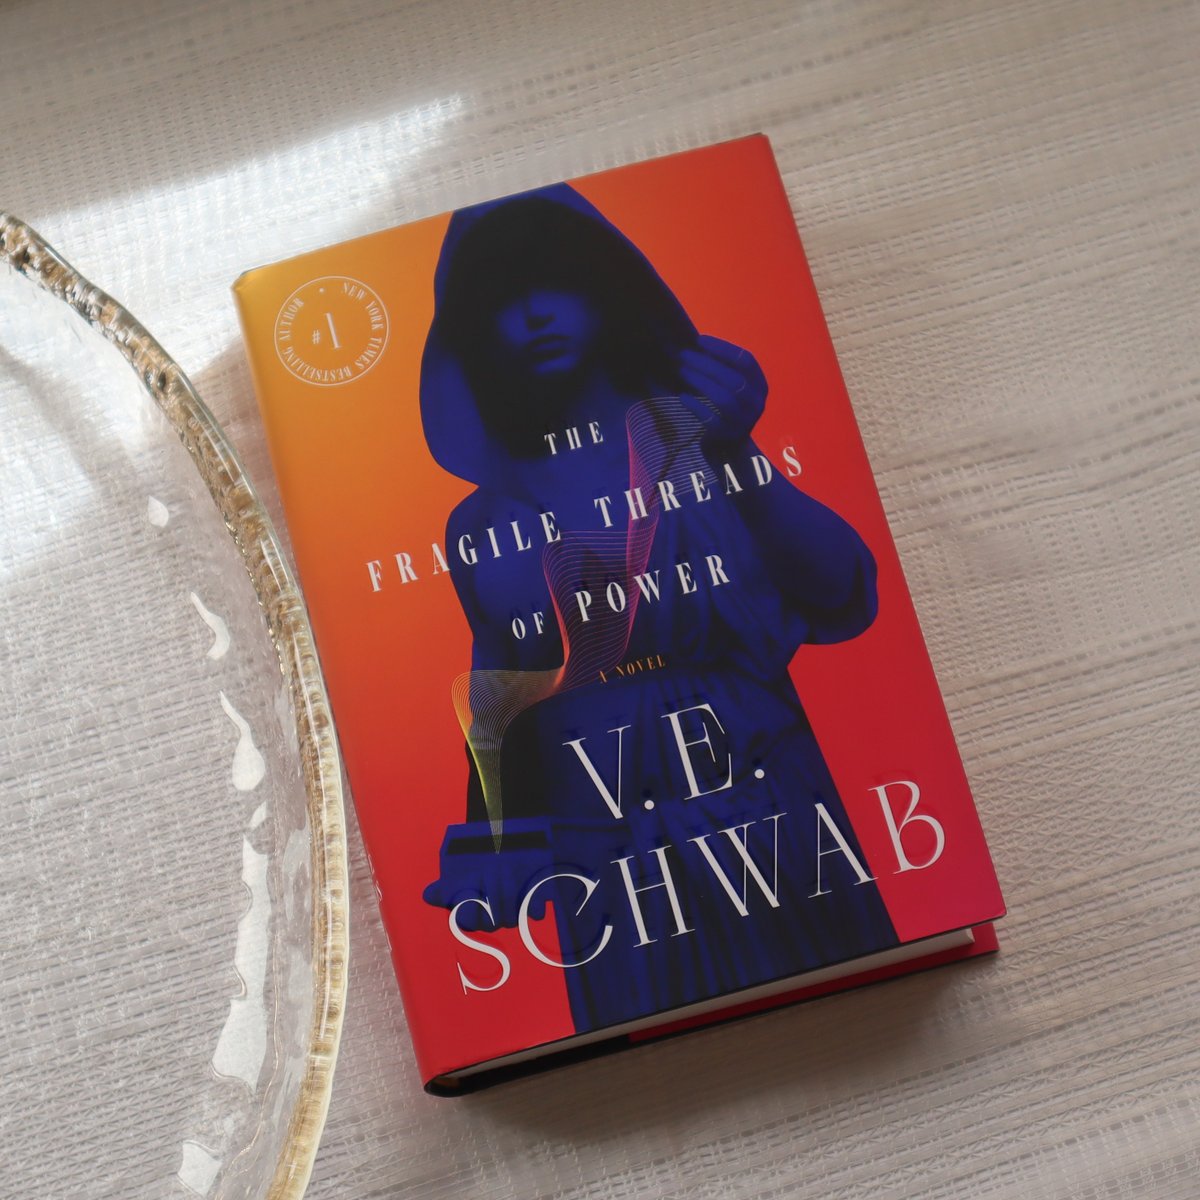 From #1 @nytimes bestselling author @veschwab comes a new adventure set in a beloved world—where old friends and foes alike are faced with a dangerous new threat... Find out more in #TheFragileThreadsofPower - out now! ✨ bit.ly/3K9aOIN